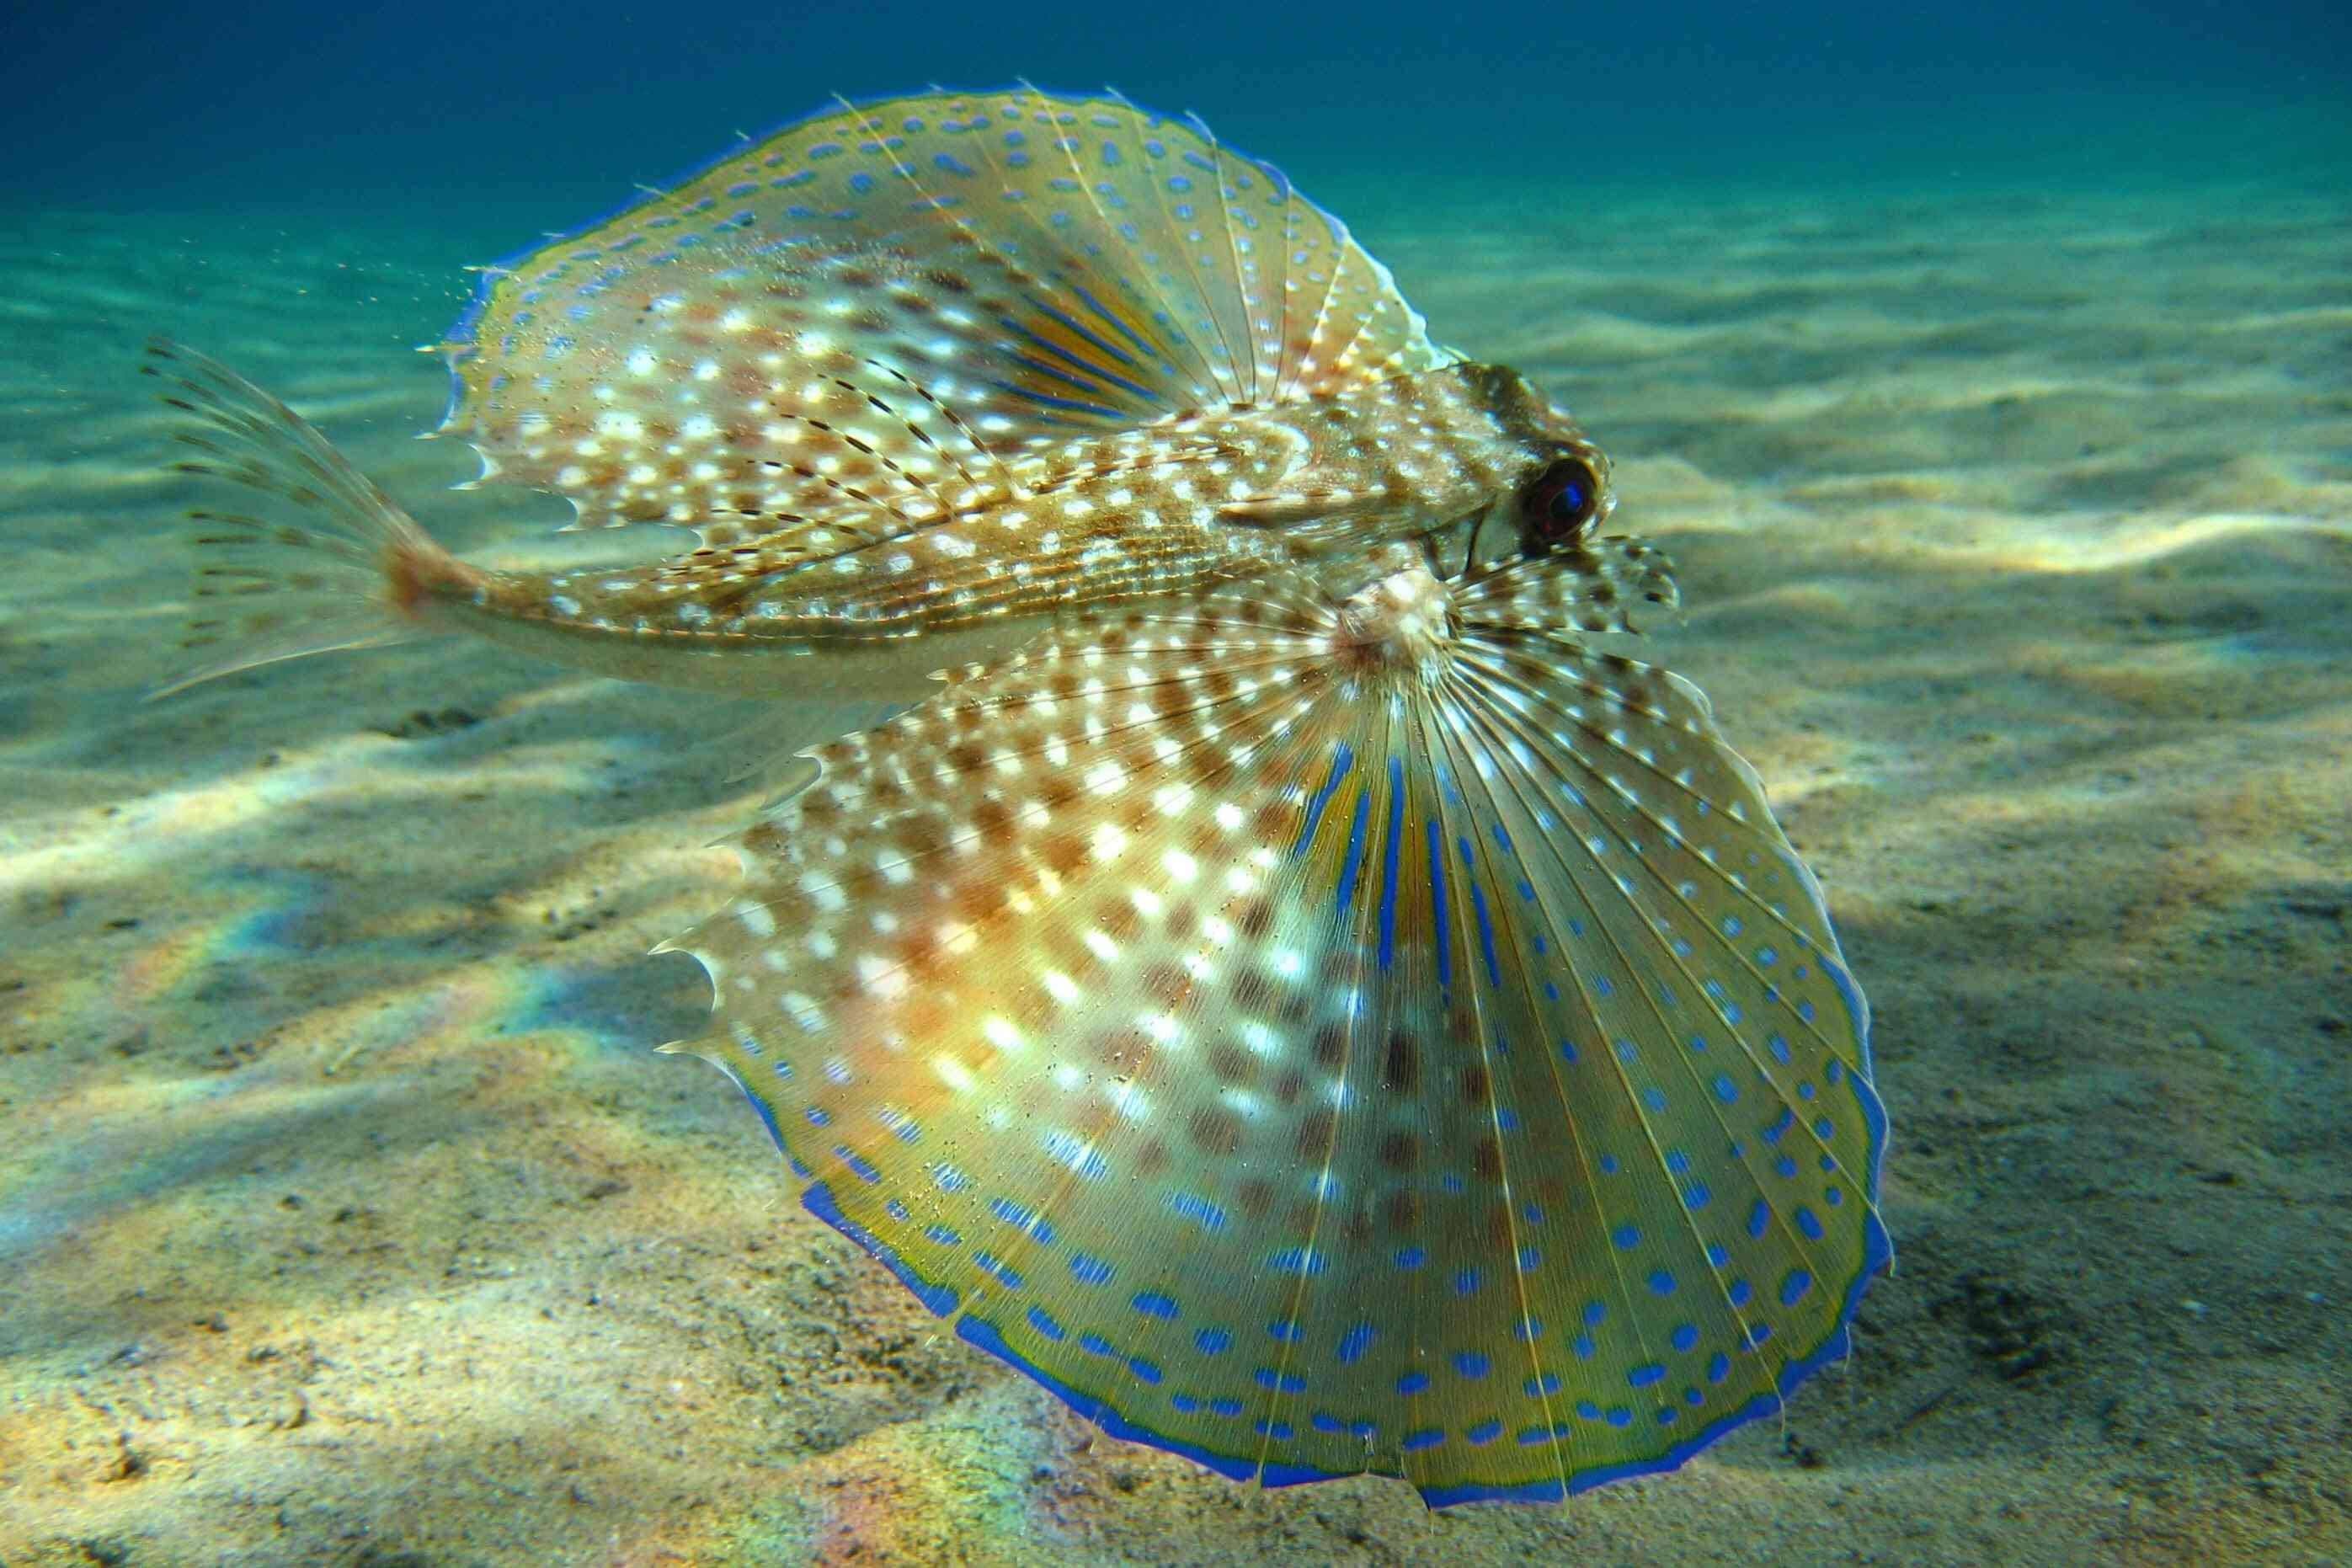 The flying gurnard is most notable for its eye-catching 